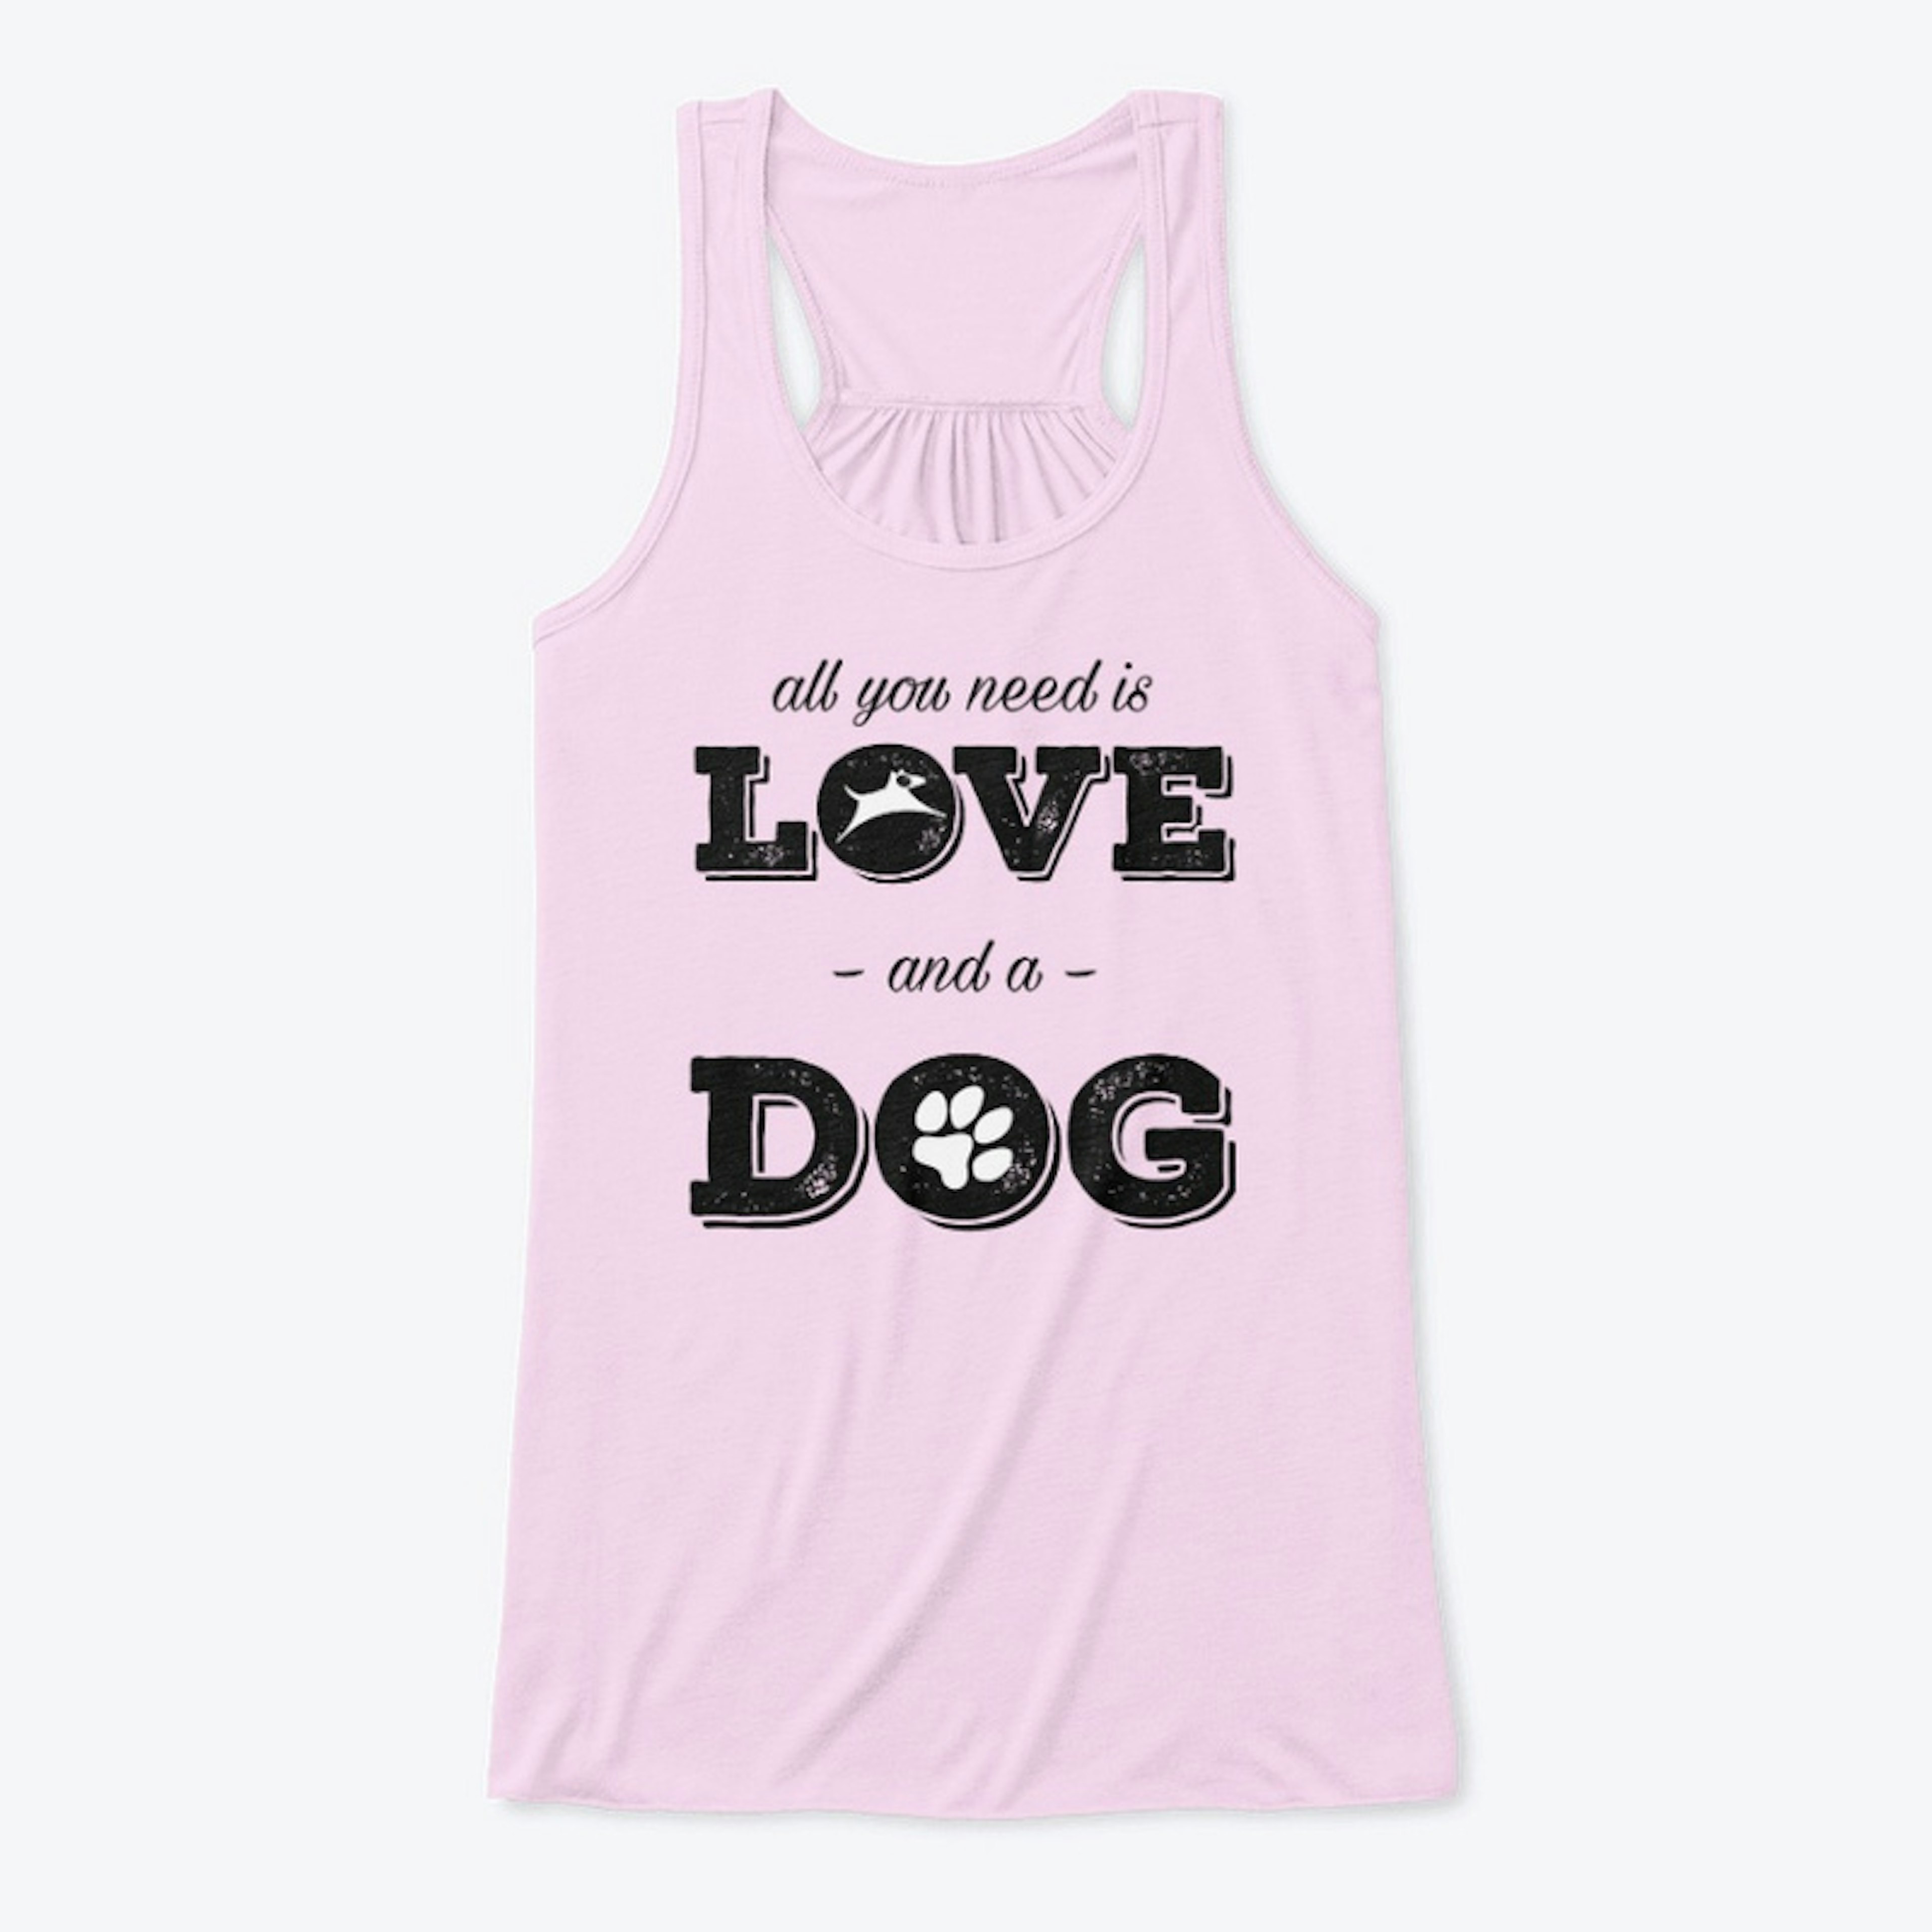 All you need is Love and a Dog